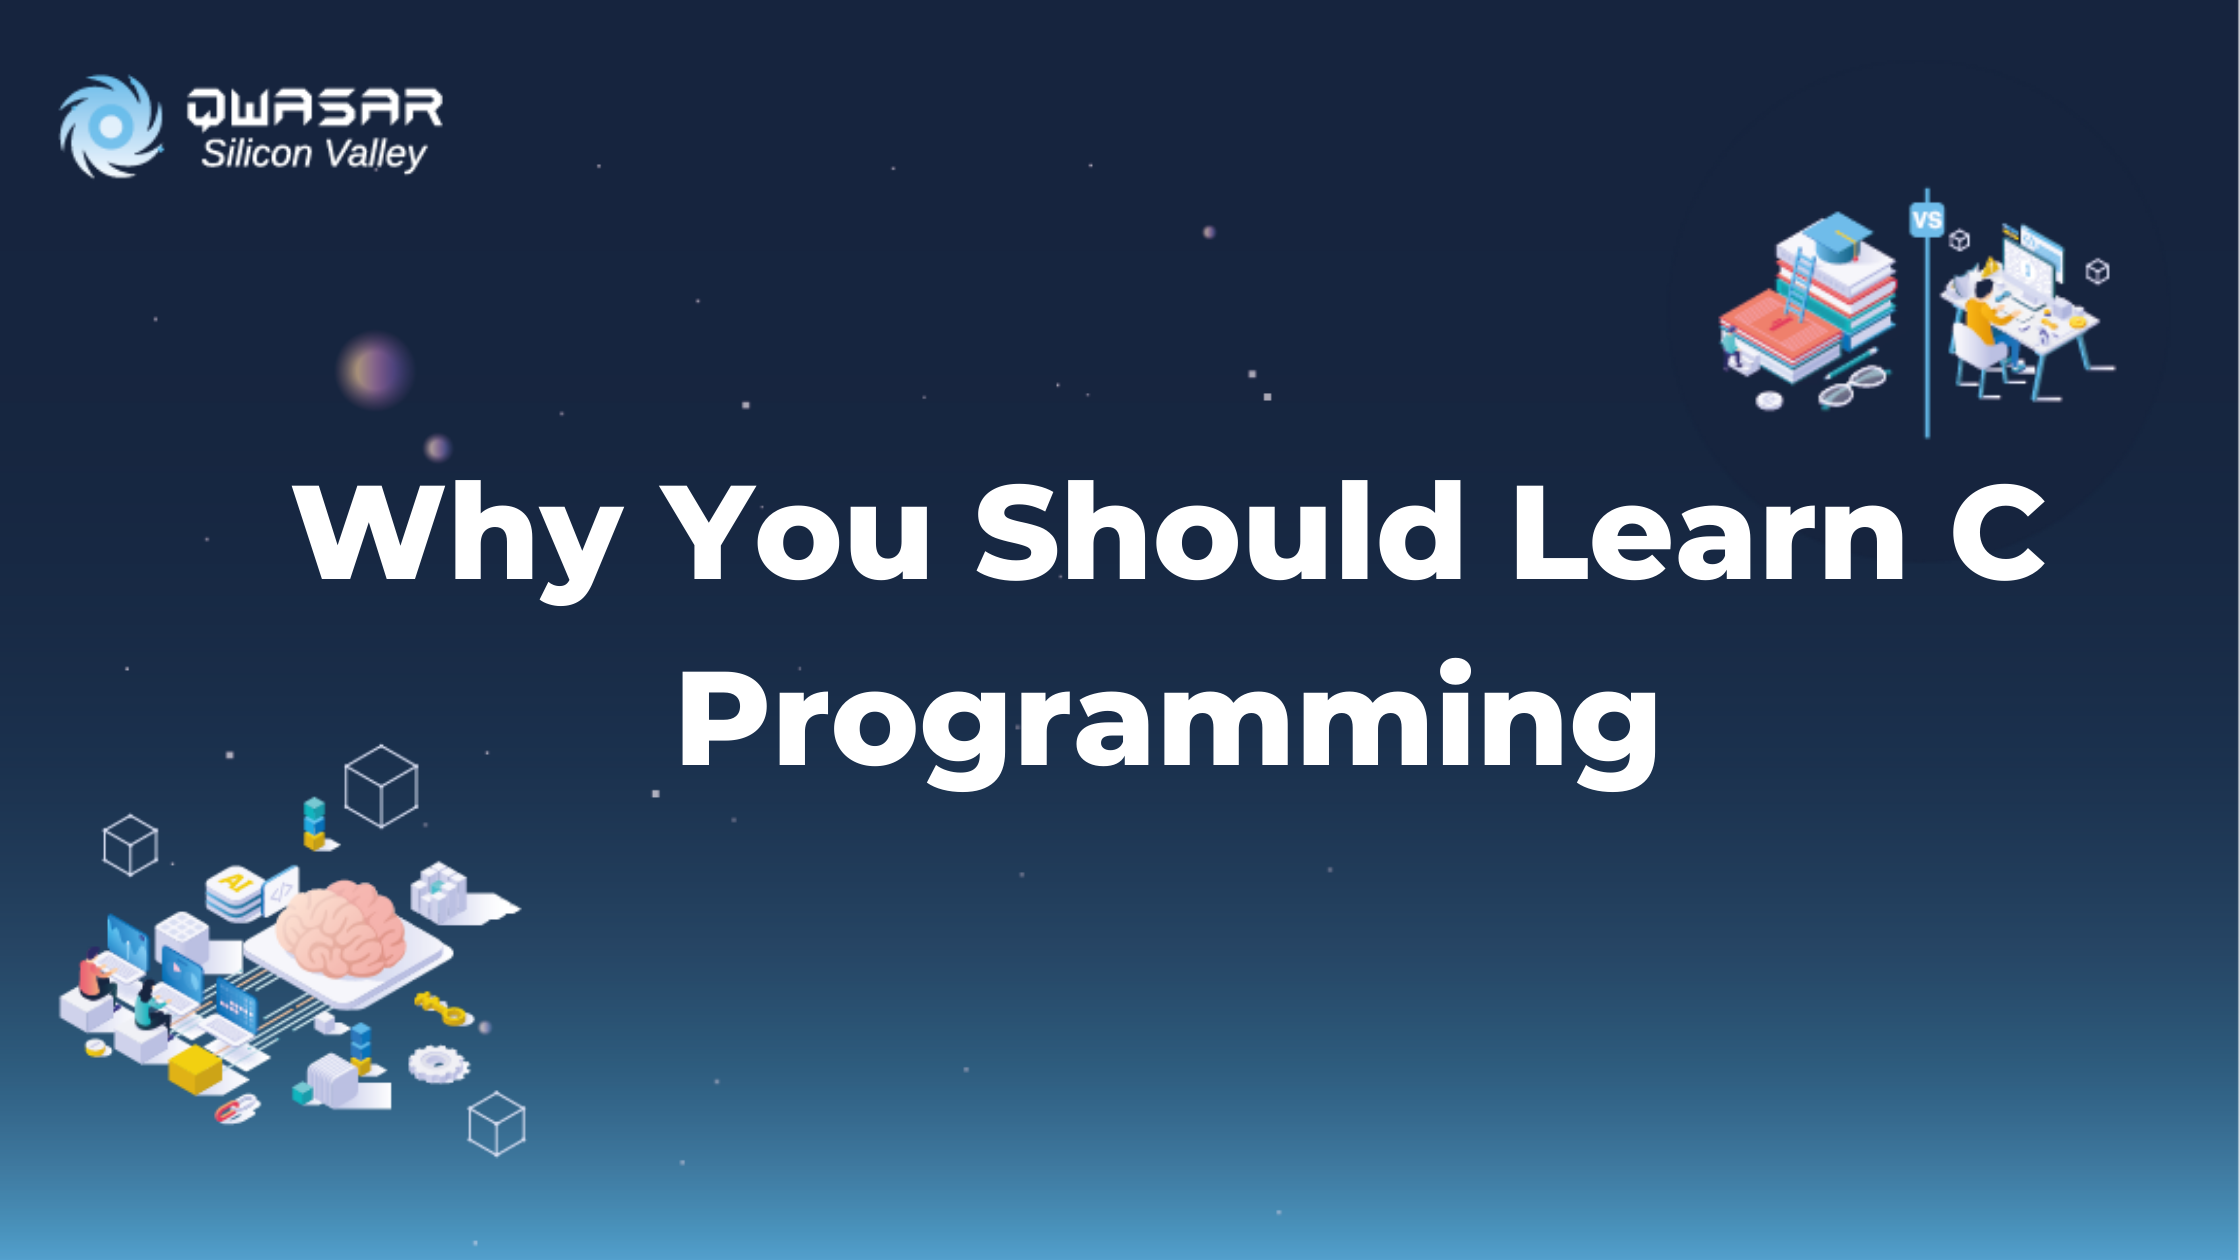 Why You Should Learn C Programming